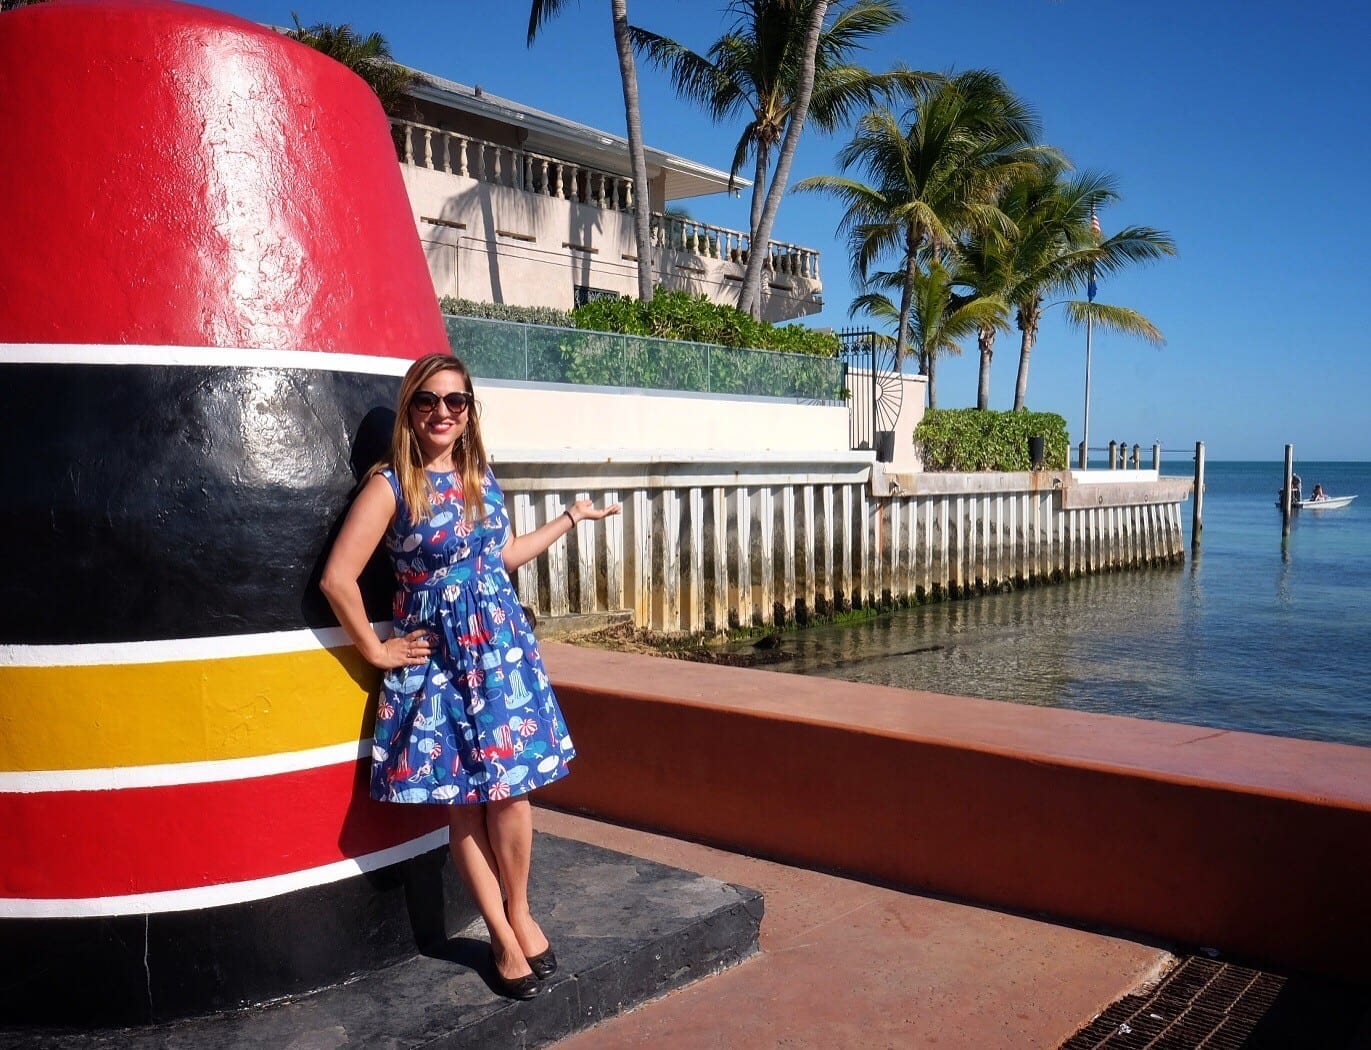 Solo Female Travel in Key West and the Florida Keys pic